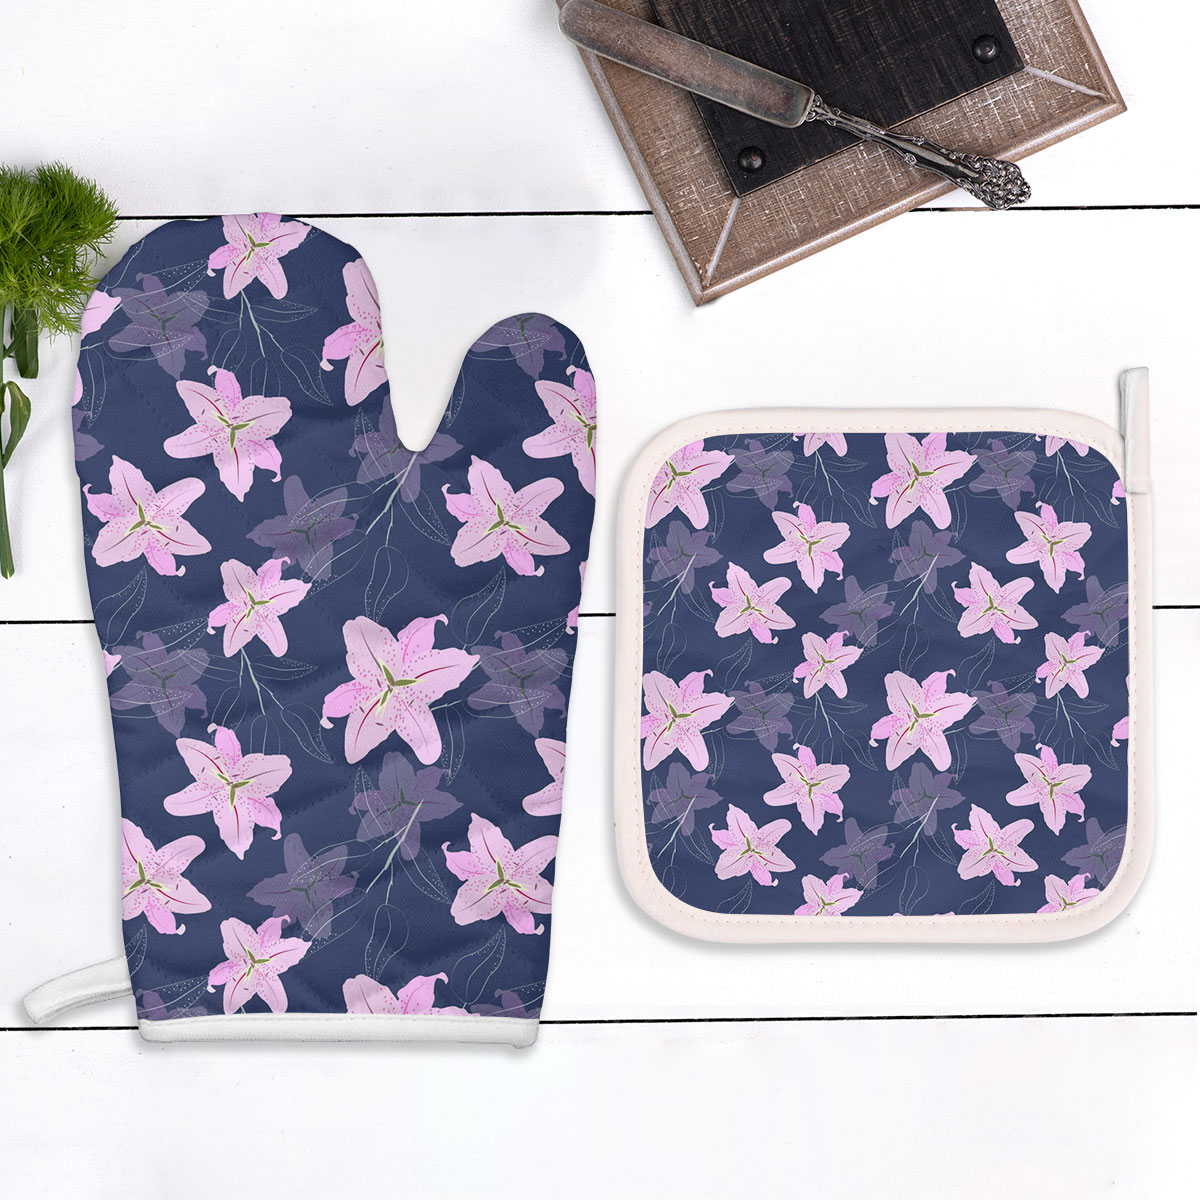 Purple Lily Flowers Oven Mitts Pot Holder Set